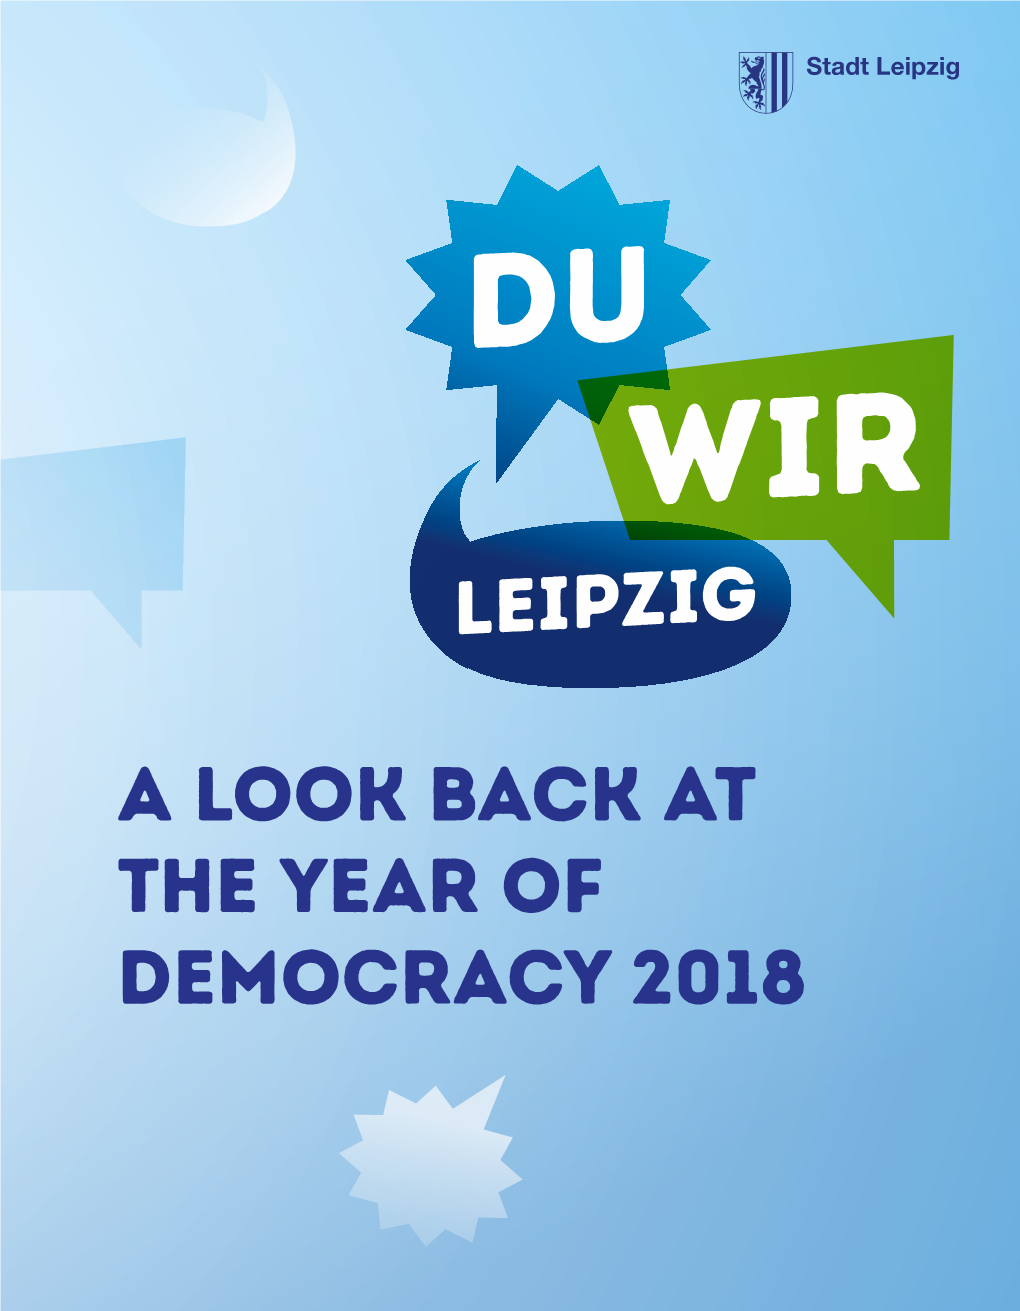 A Look Back at the Year of Democracy 2018 12 PROJEKTEPROJECTS